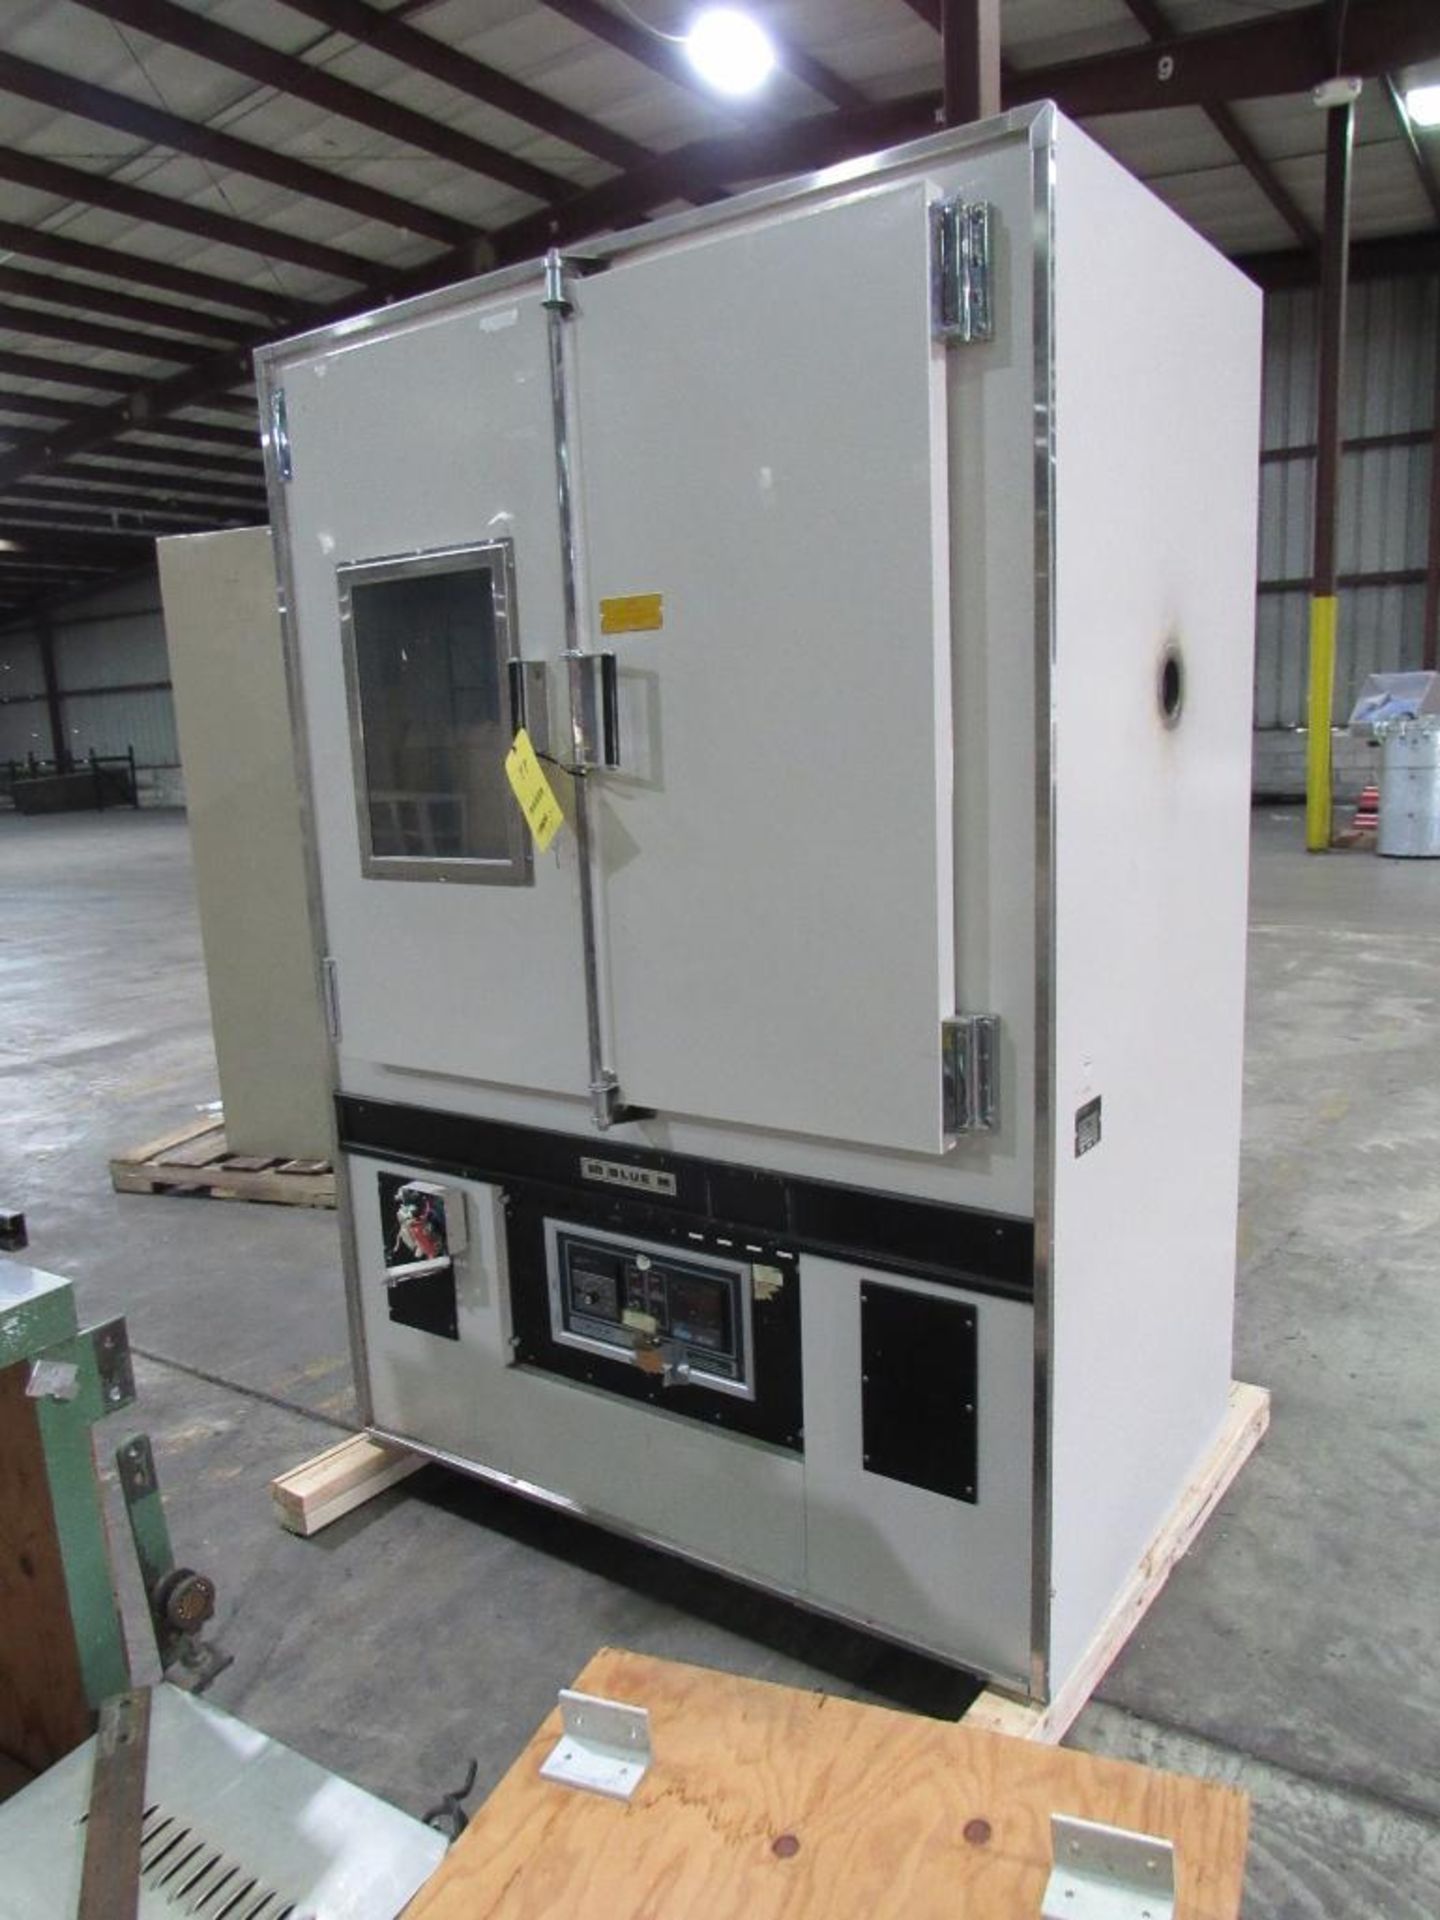 Blue M Electric Double-Door Batch Oven Model DC1506C, S/N DC6692 (LOCATED IN SOUTH MILWAUKEE, WI)